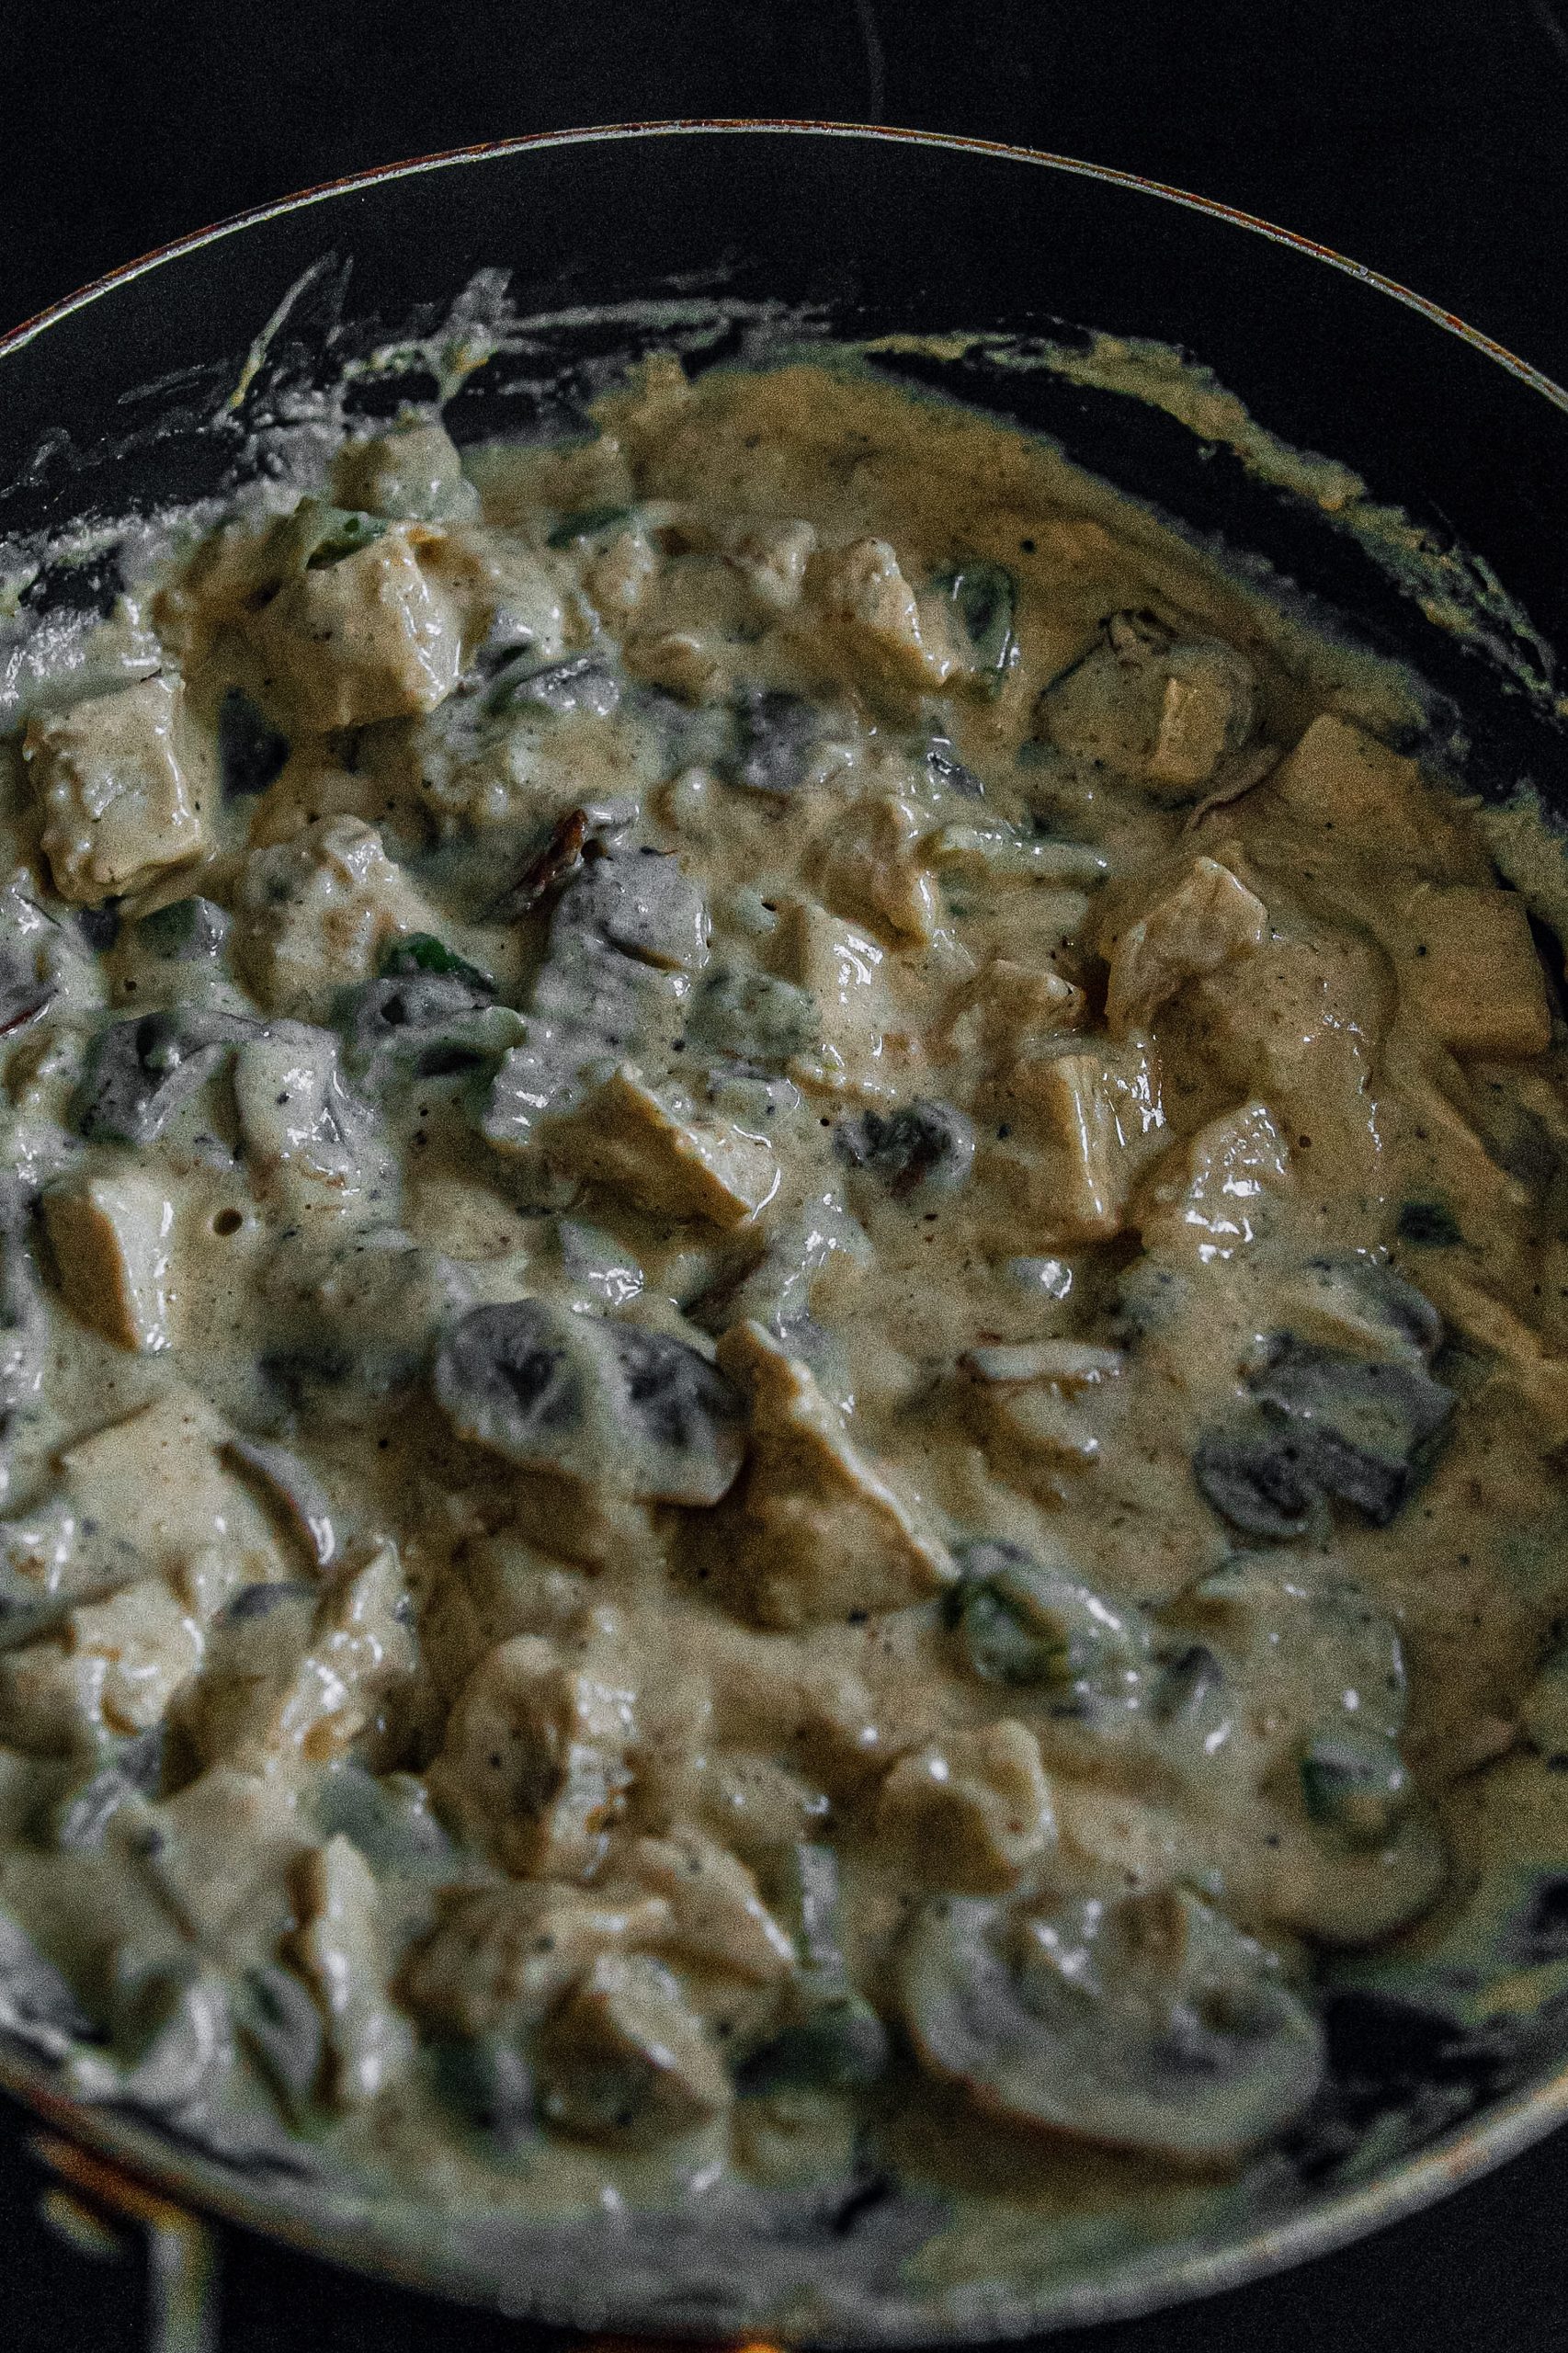 Add sour cream mixture to skillet and heat for a few minutes, stirring constantly. Serve hot.